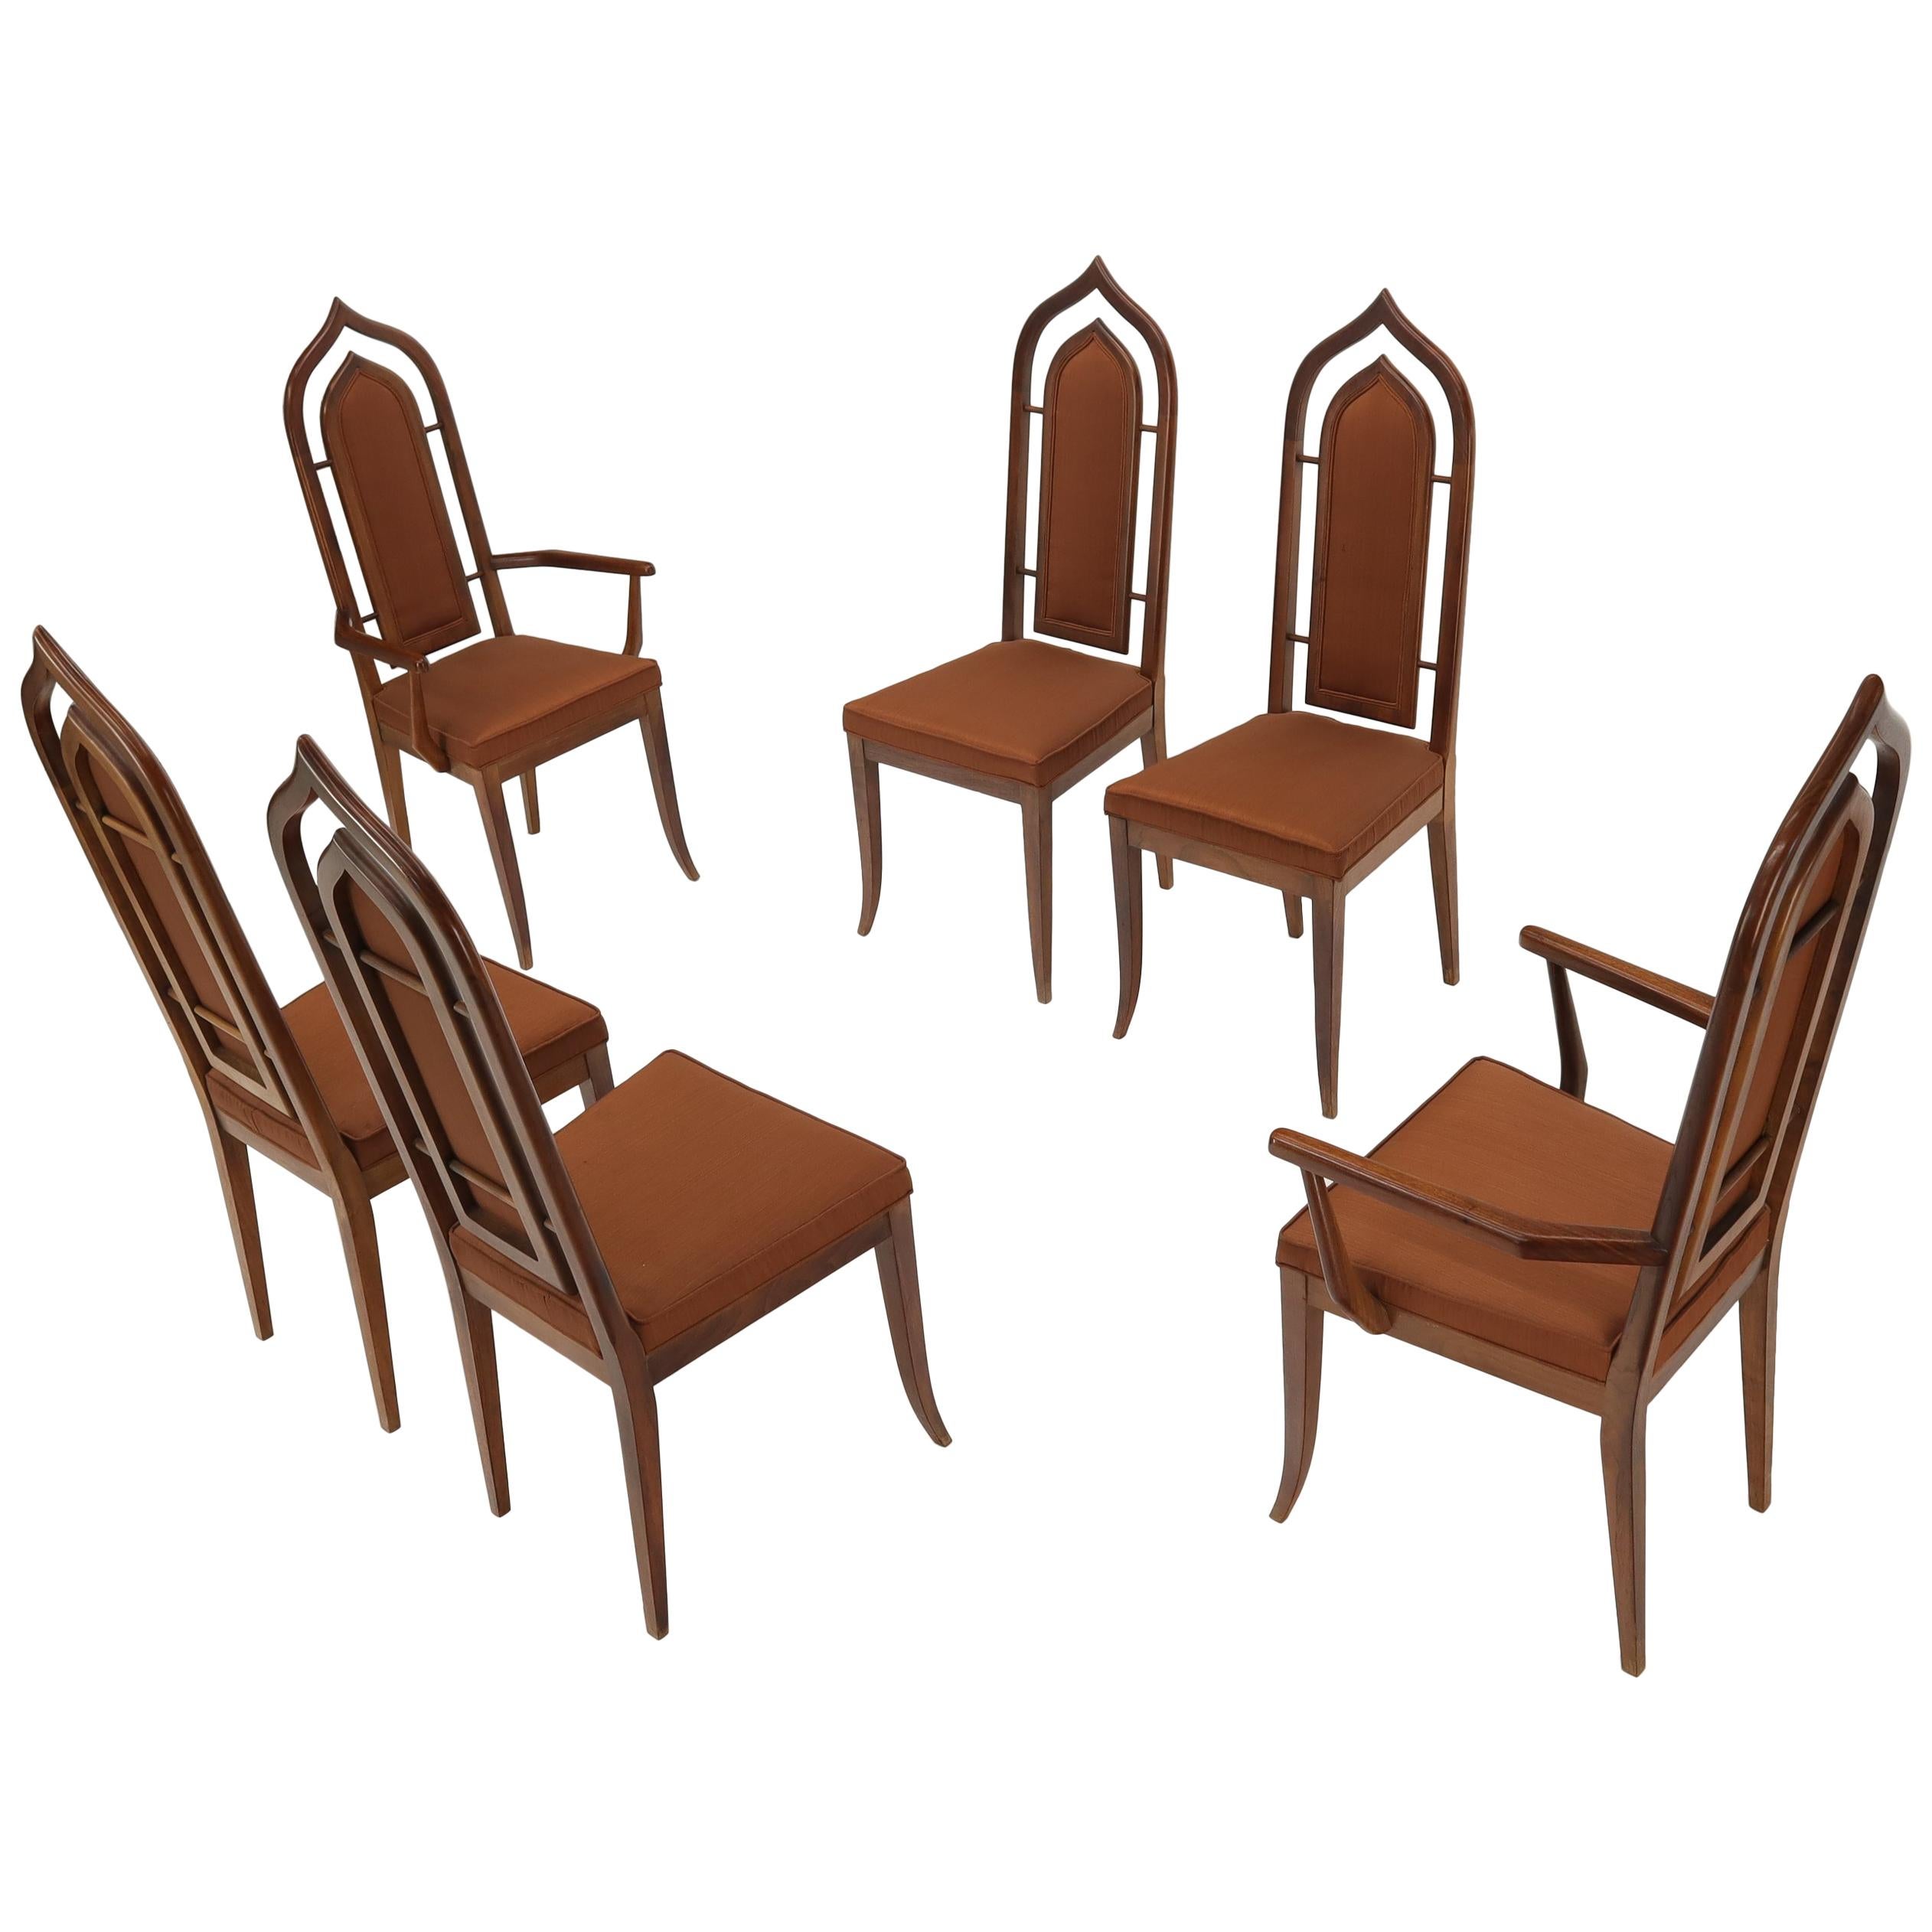 Set of 6 Danish Mid-Century Modern Dining Chairs Dome Shape Back Oiled Walnut